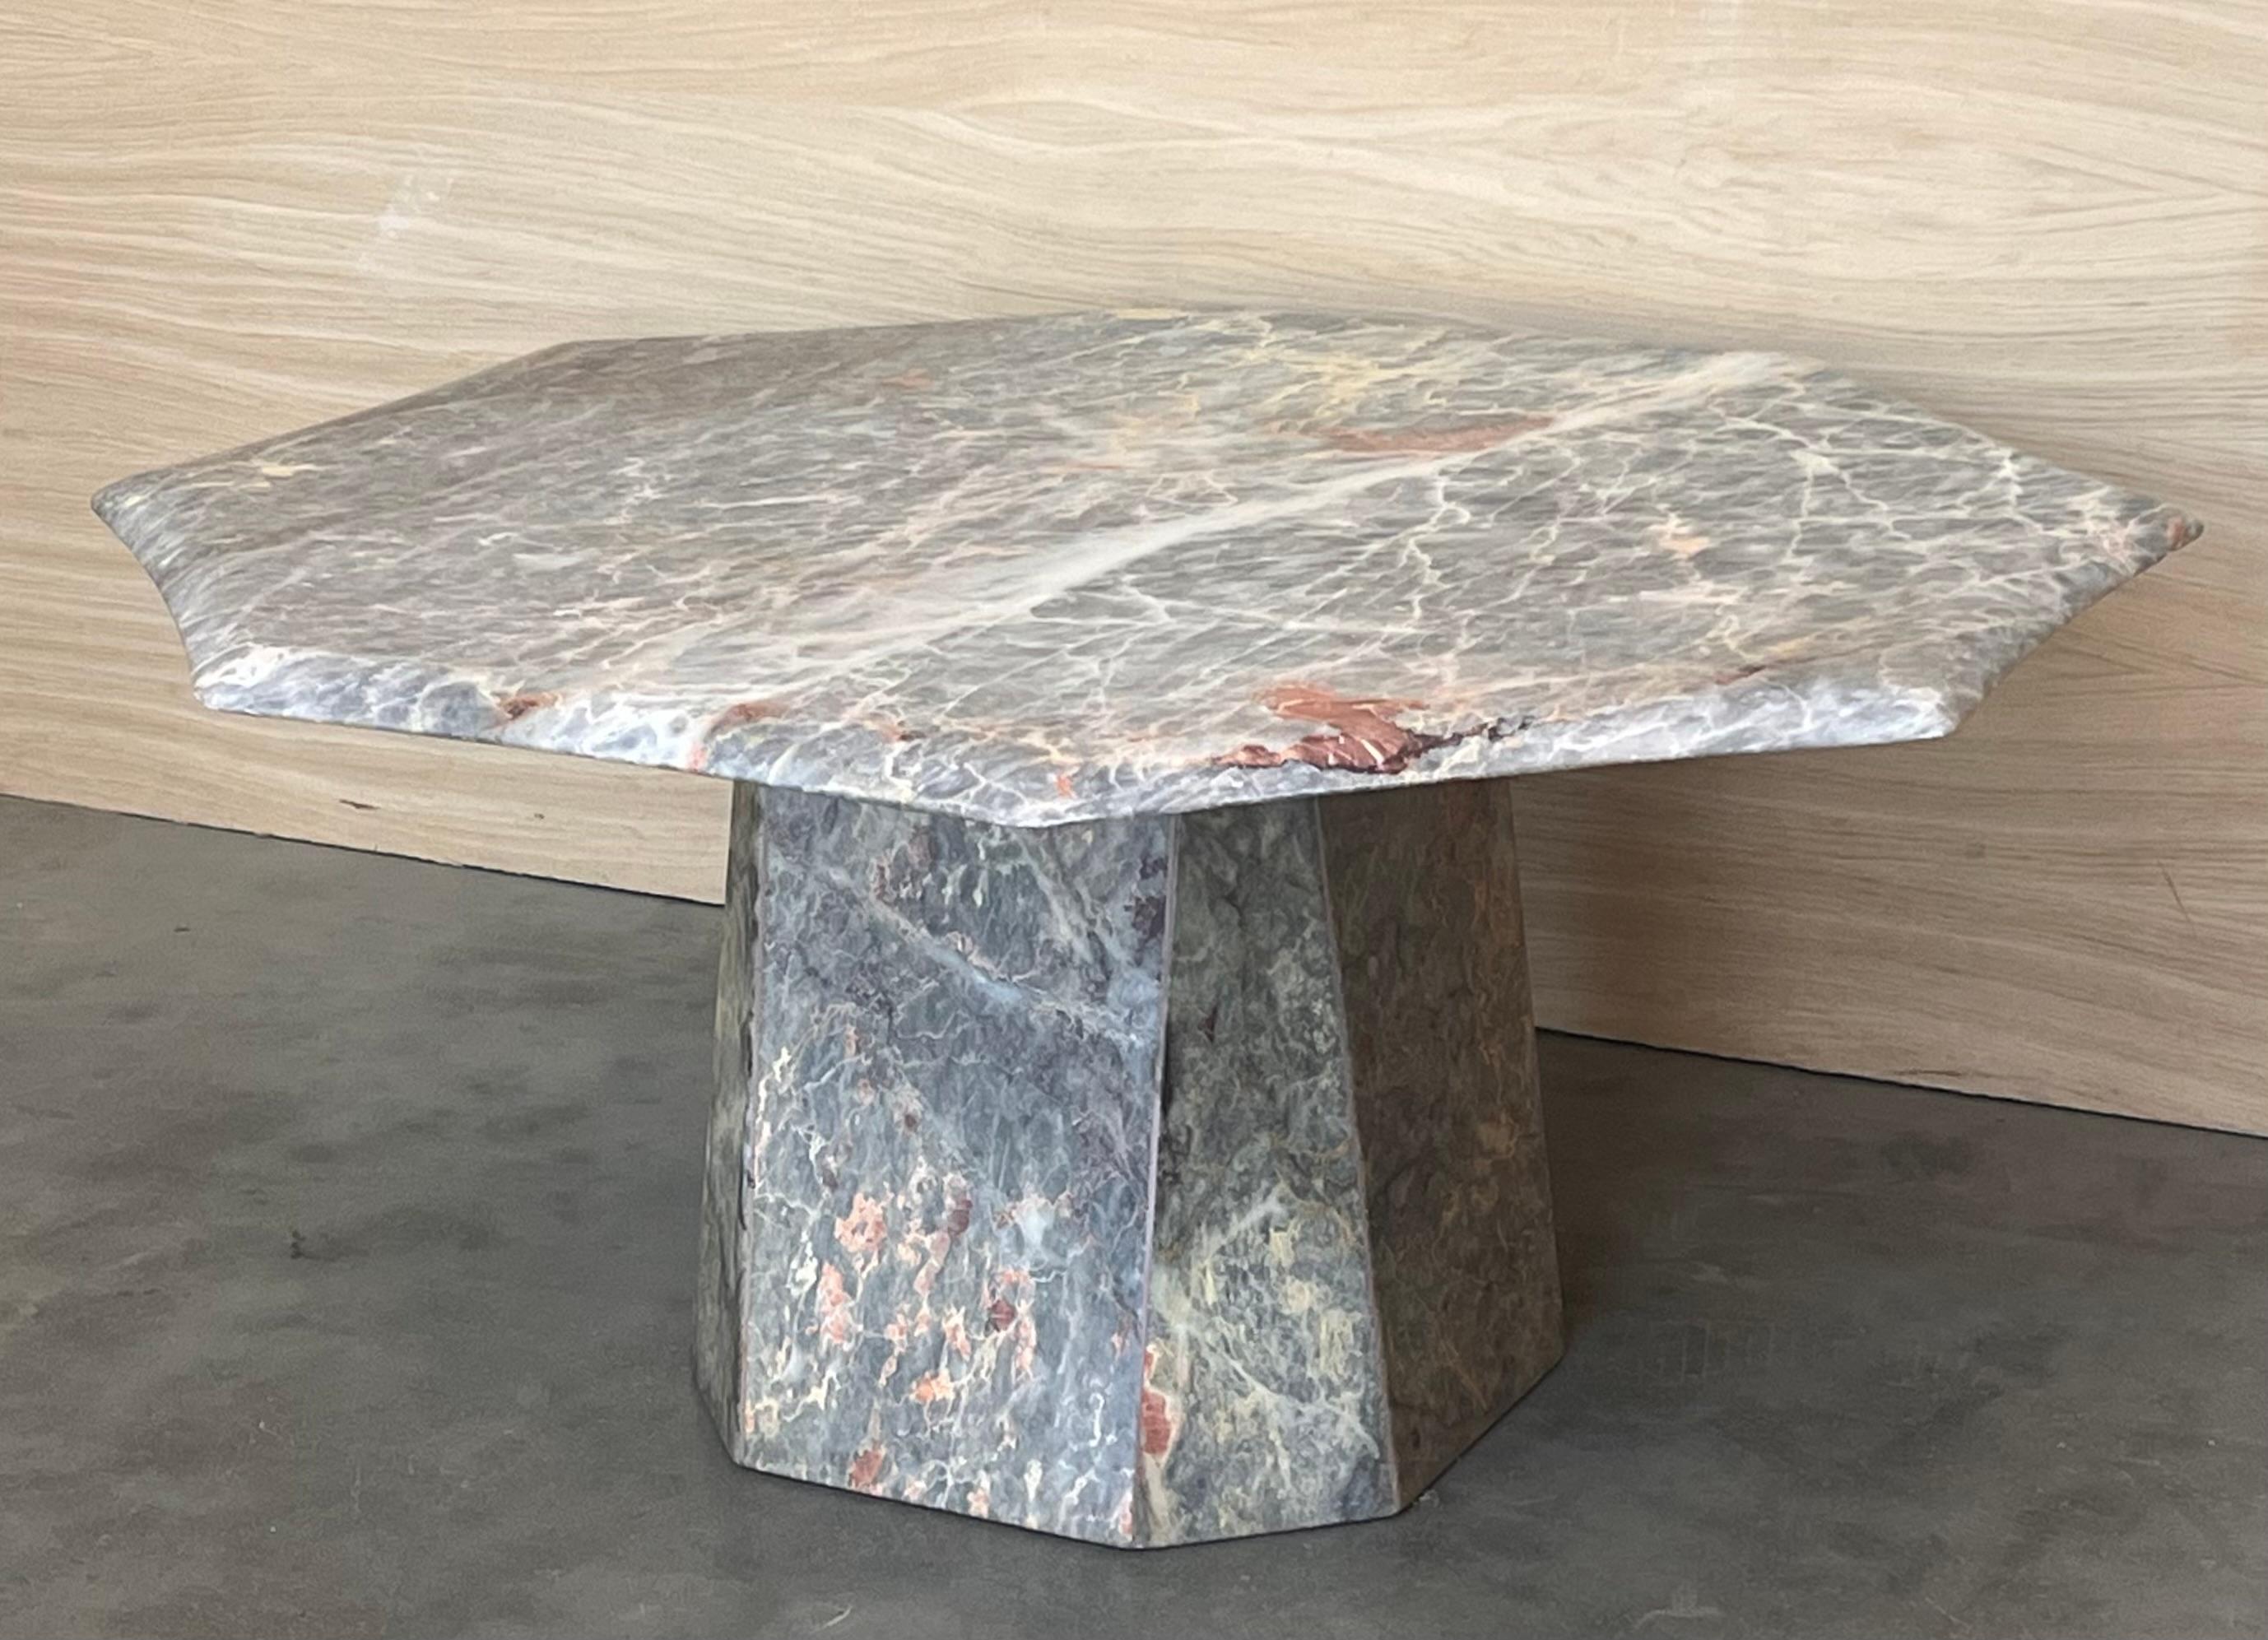 1970s Substantial White, Grey, Black, Pink Marble Coffee Table, sculptural Base In Good Condition For Sale In Miami, FL